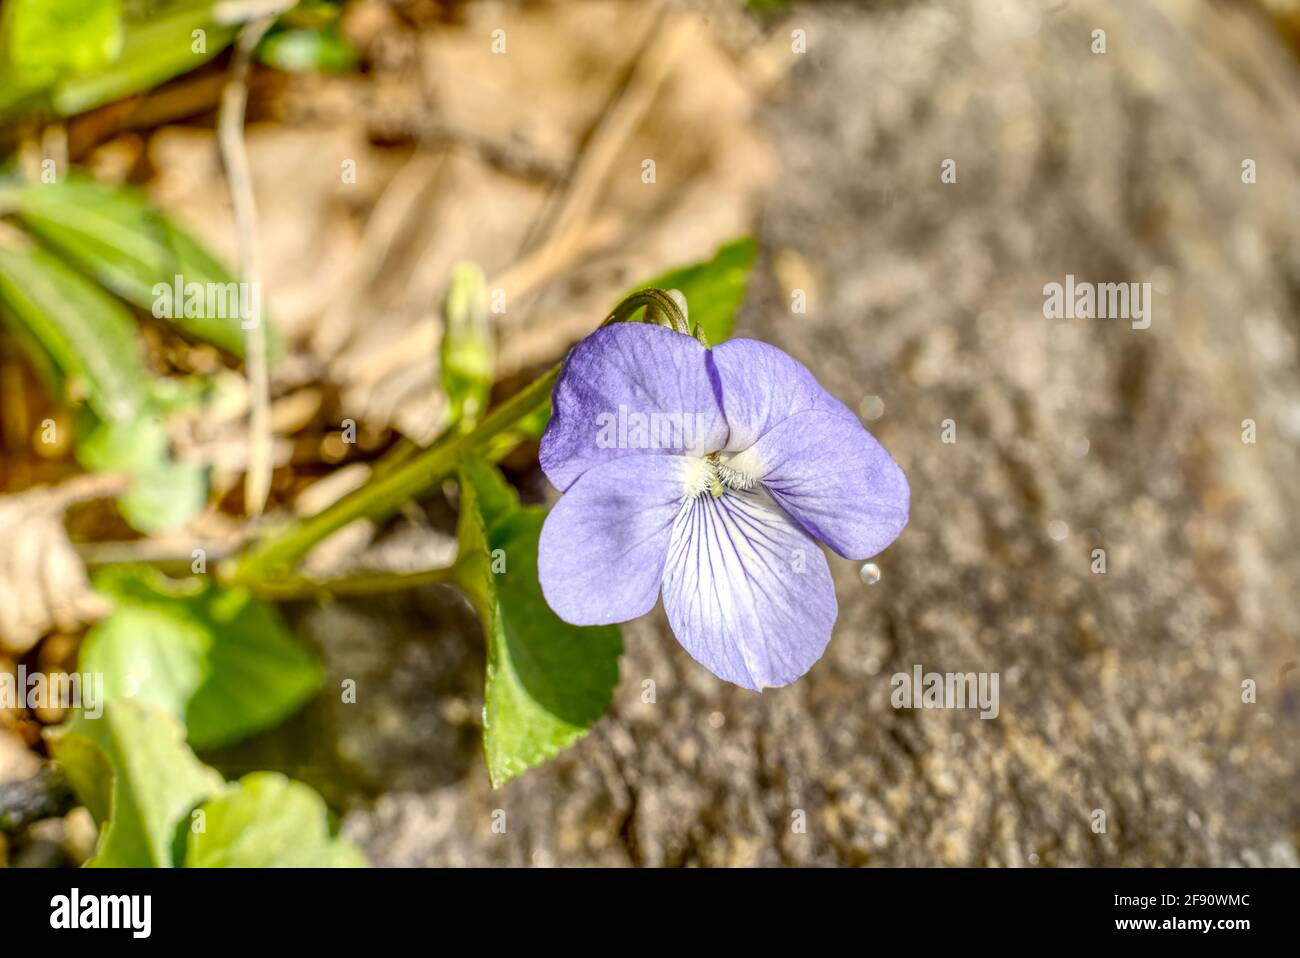 Closeup of a viola riviniana in a meadow under the sunlight with a blurry background Stock Photo